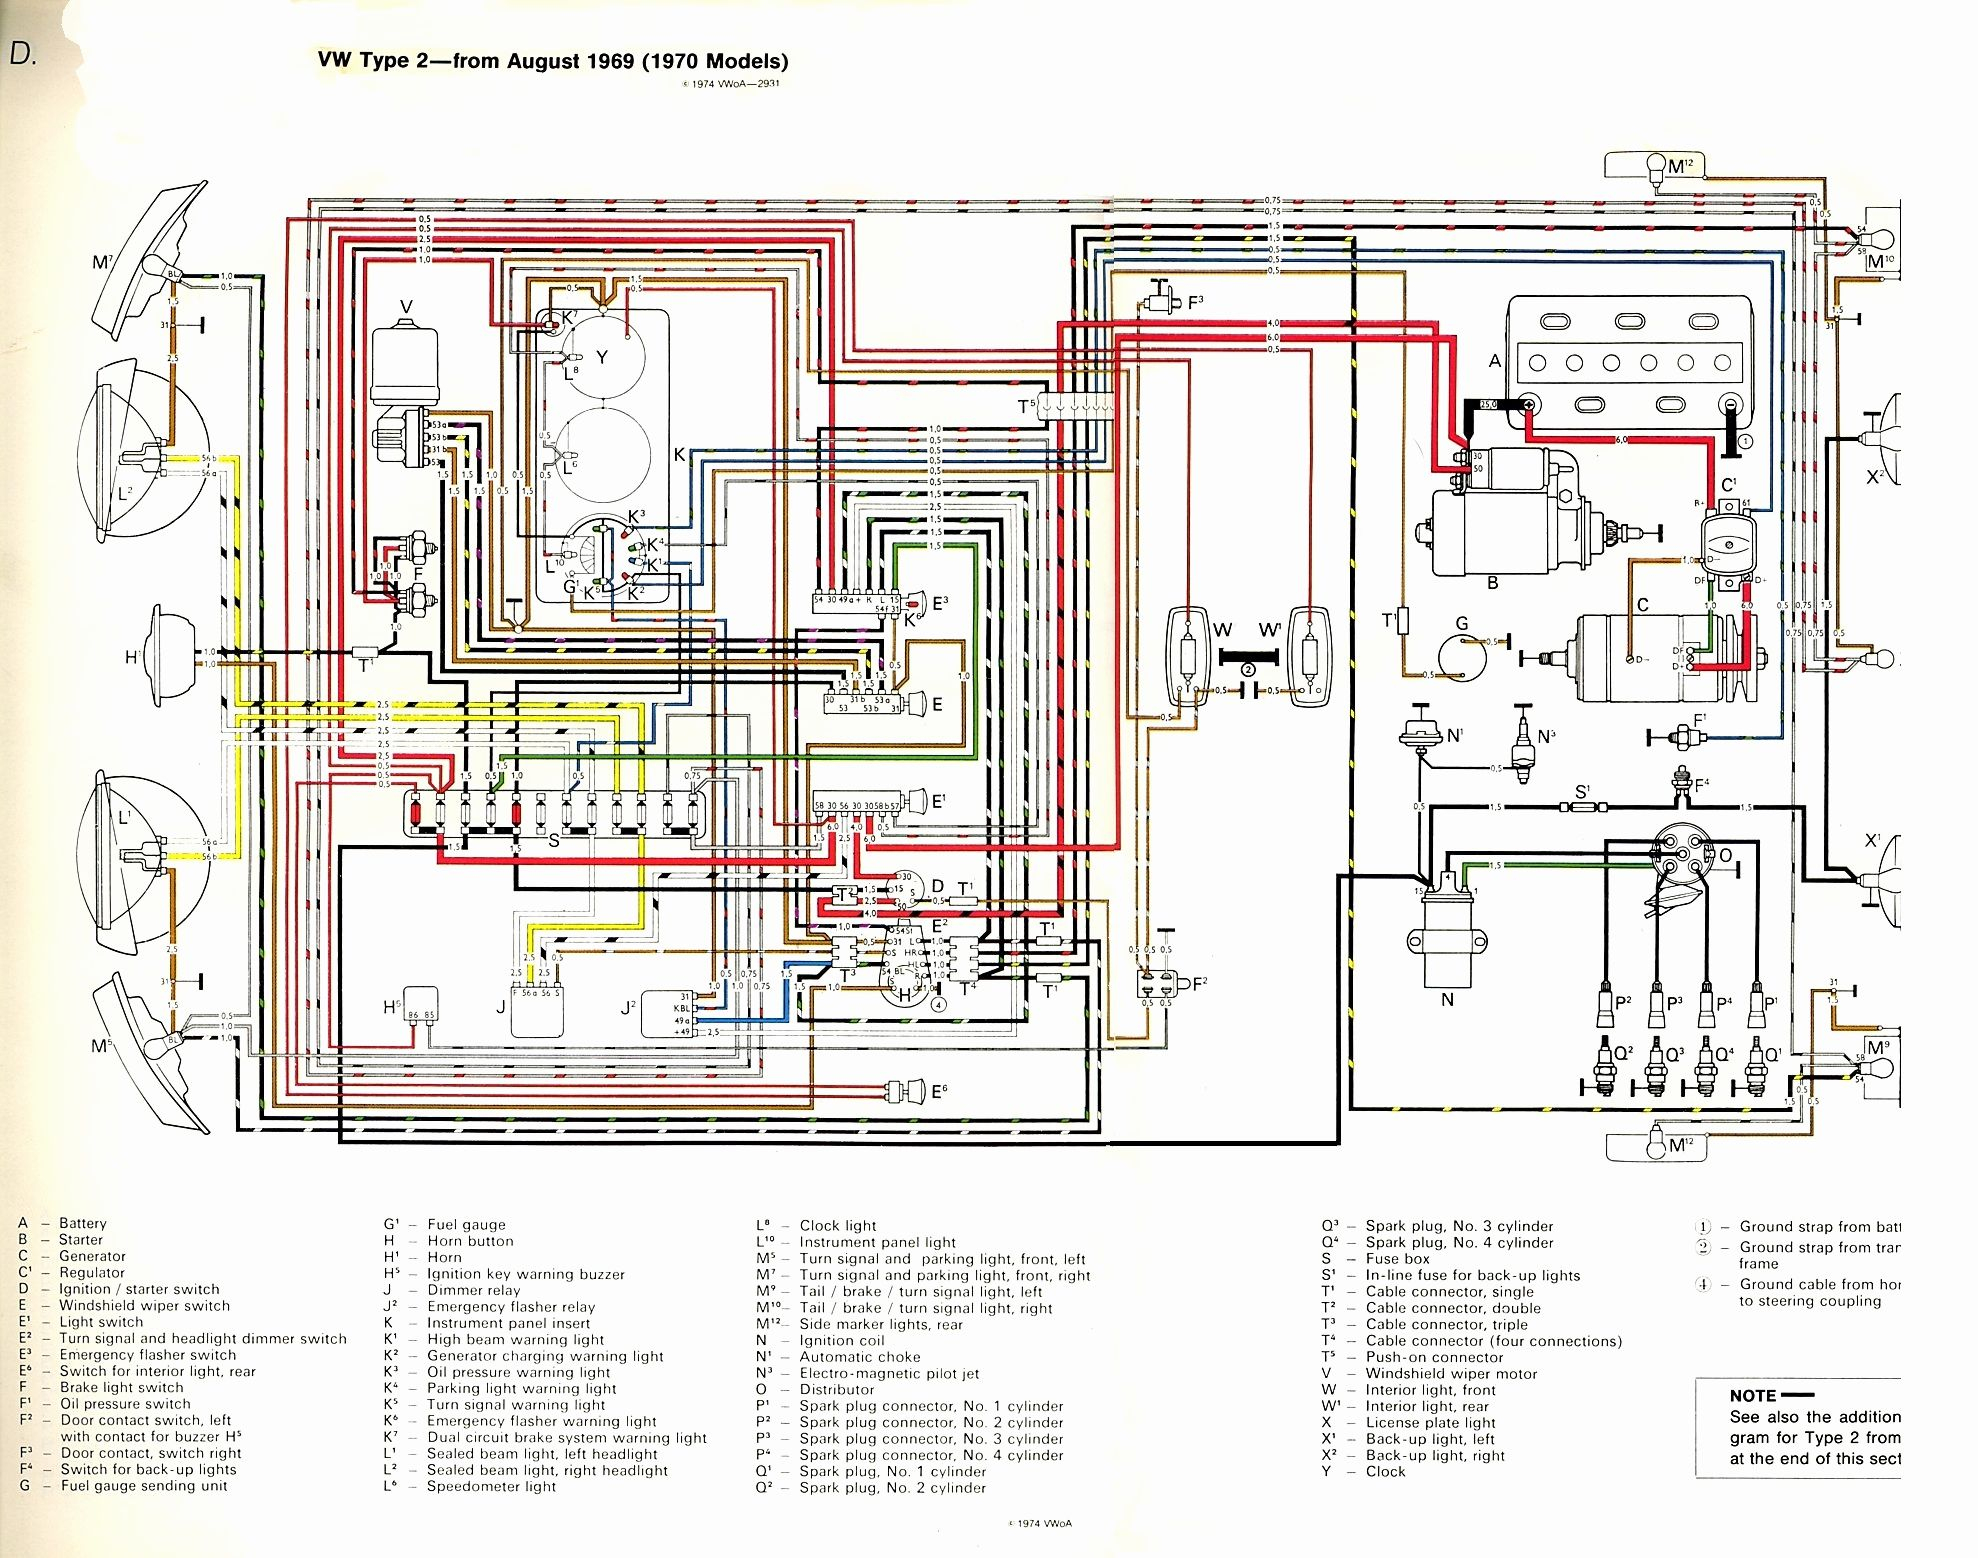 Dome Light Wiring Diagram 67 Chevelle | Wiring Diagram - Dome Light Wiring Diagram